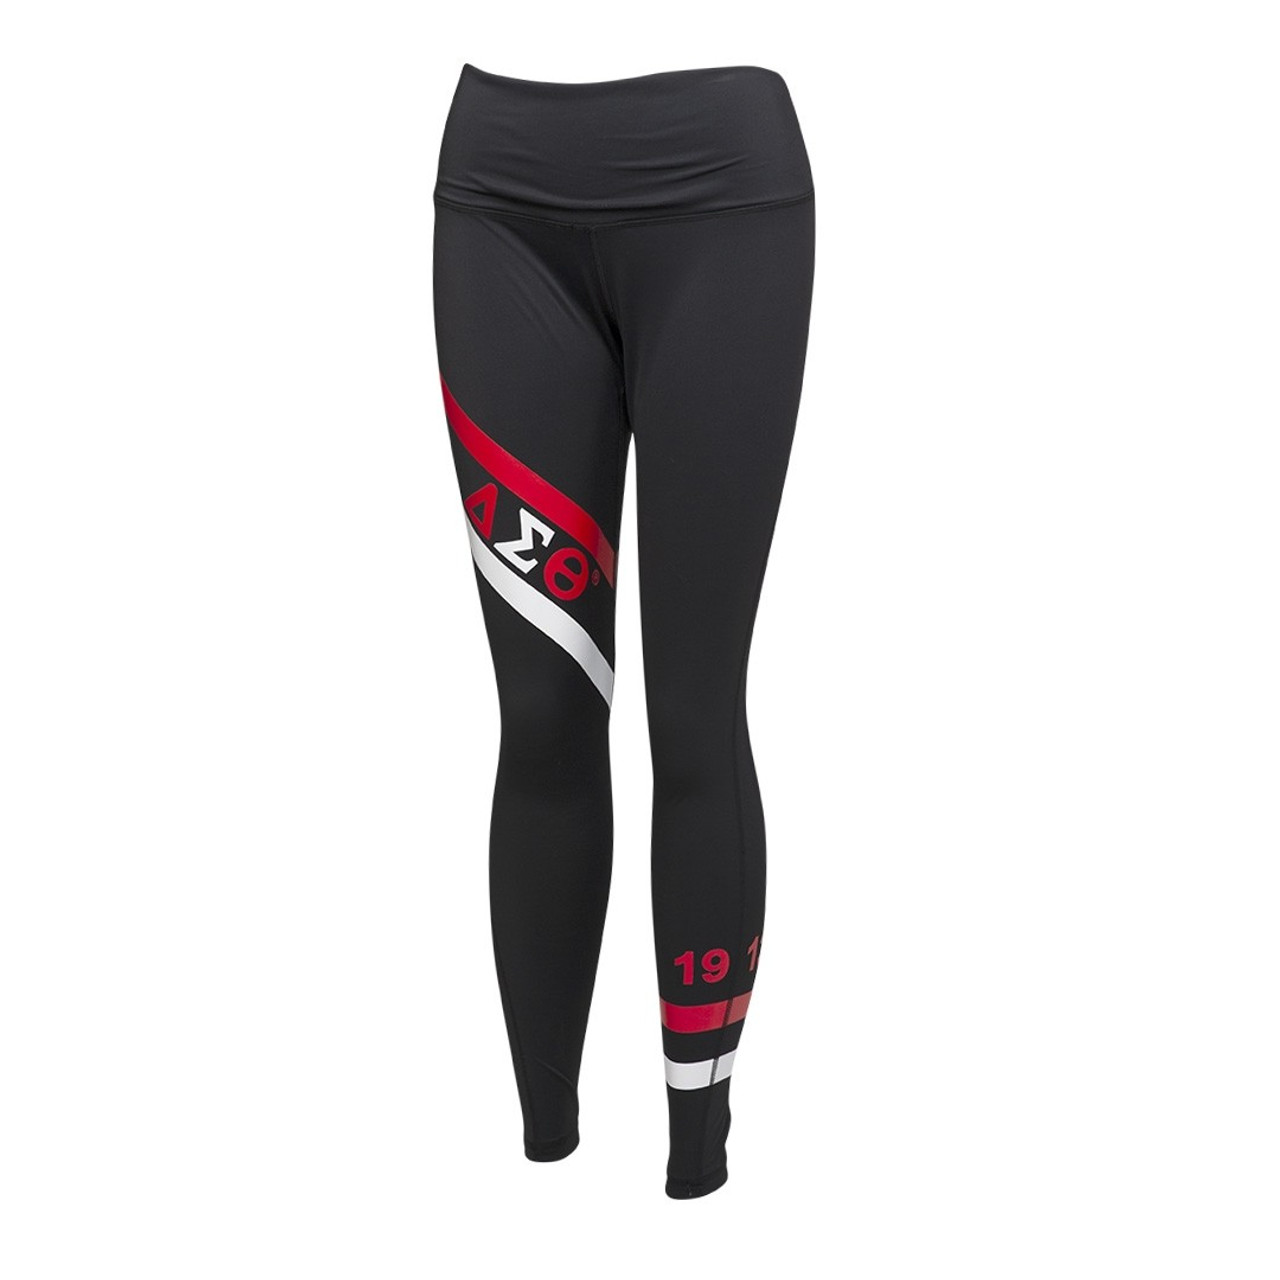 https://cdn11.bigcommerce.com/s-z4hf0was/images/stencil/1280x1280/products/1135/2300/dst_leggings__39138.1660776818.jpg?c=2